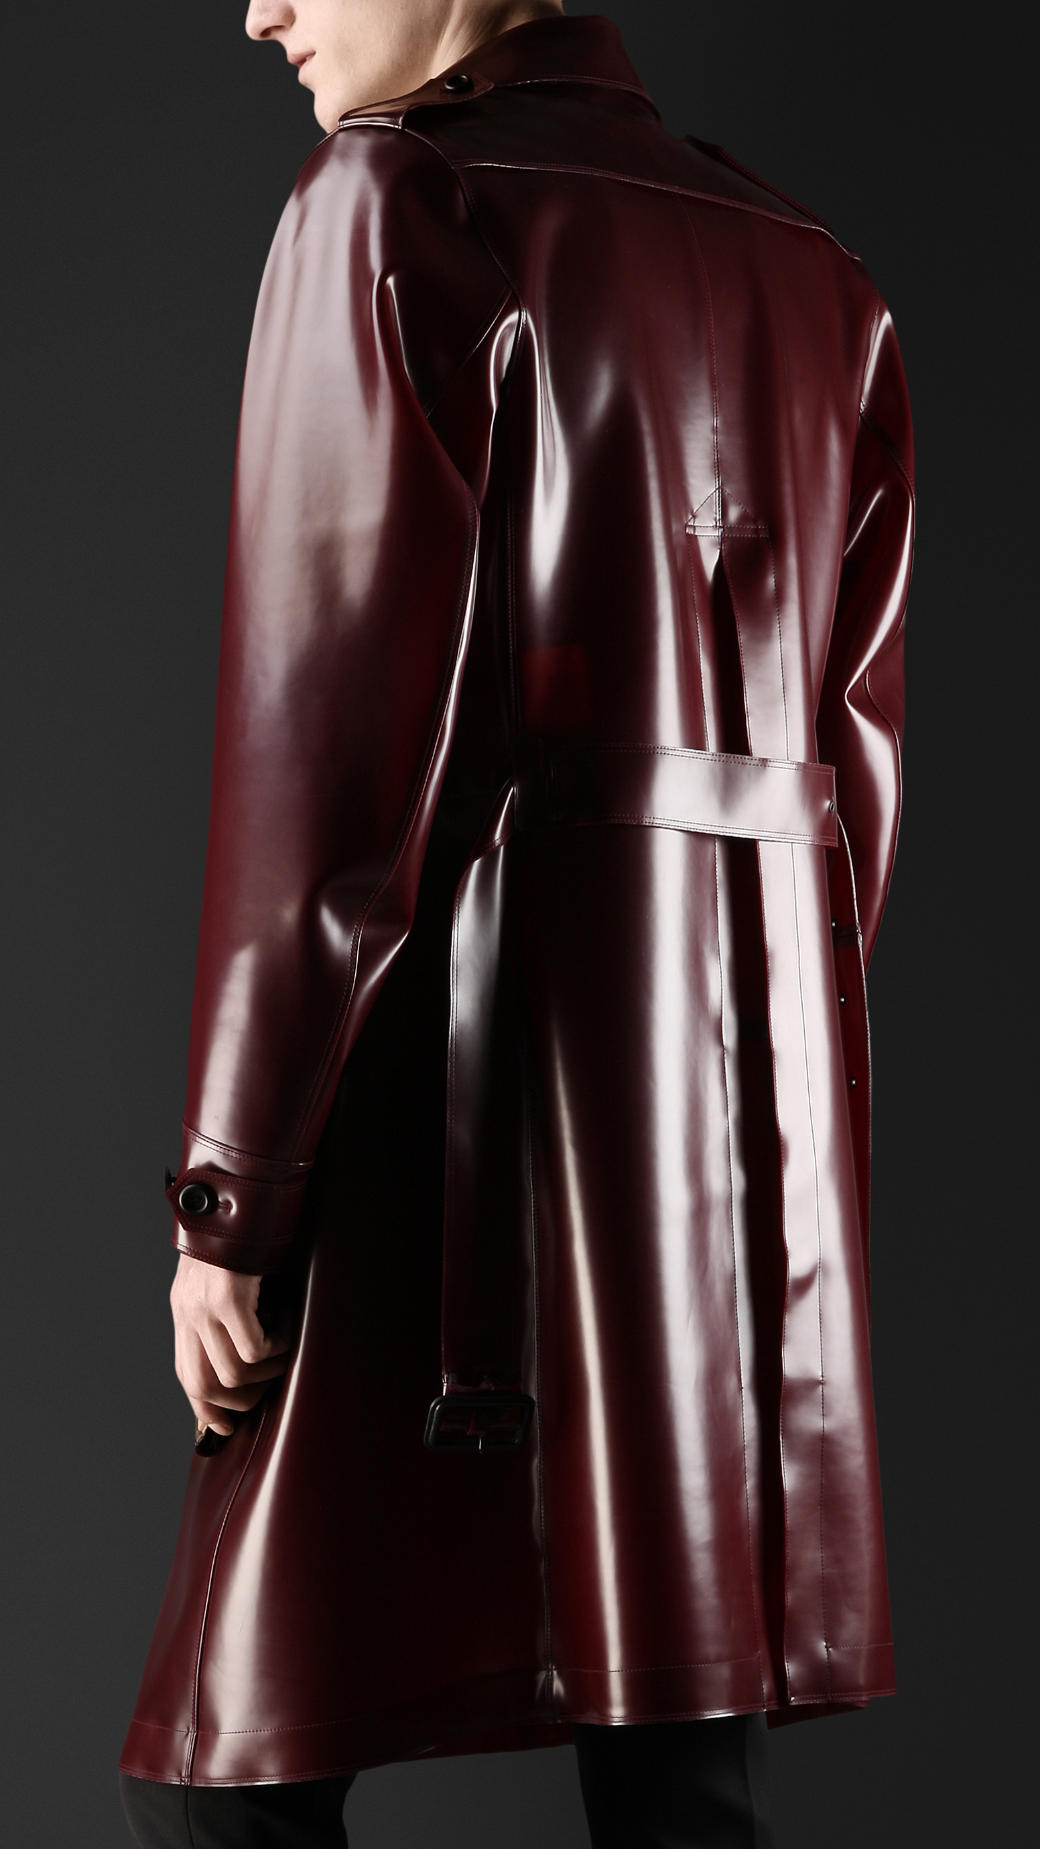 Burberry Prorsum Oxblood Translucent Rubber Trench Coat Product 2 10849148 315115109 